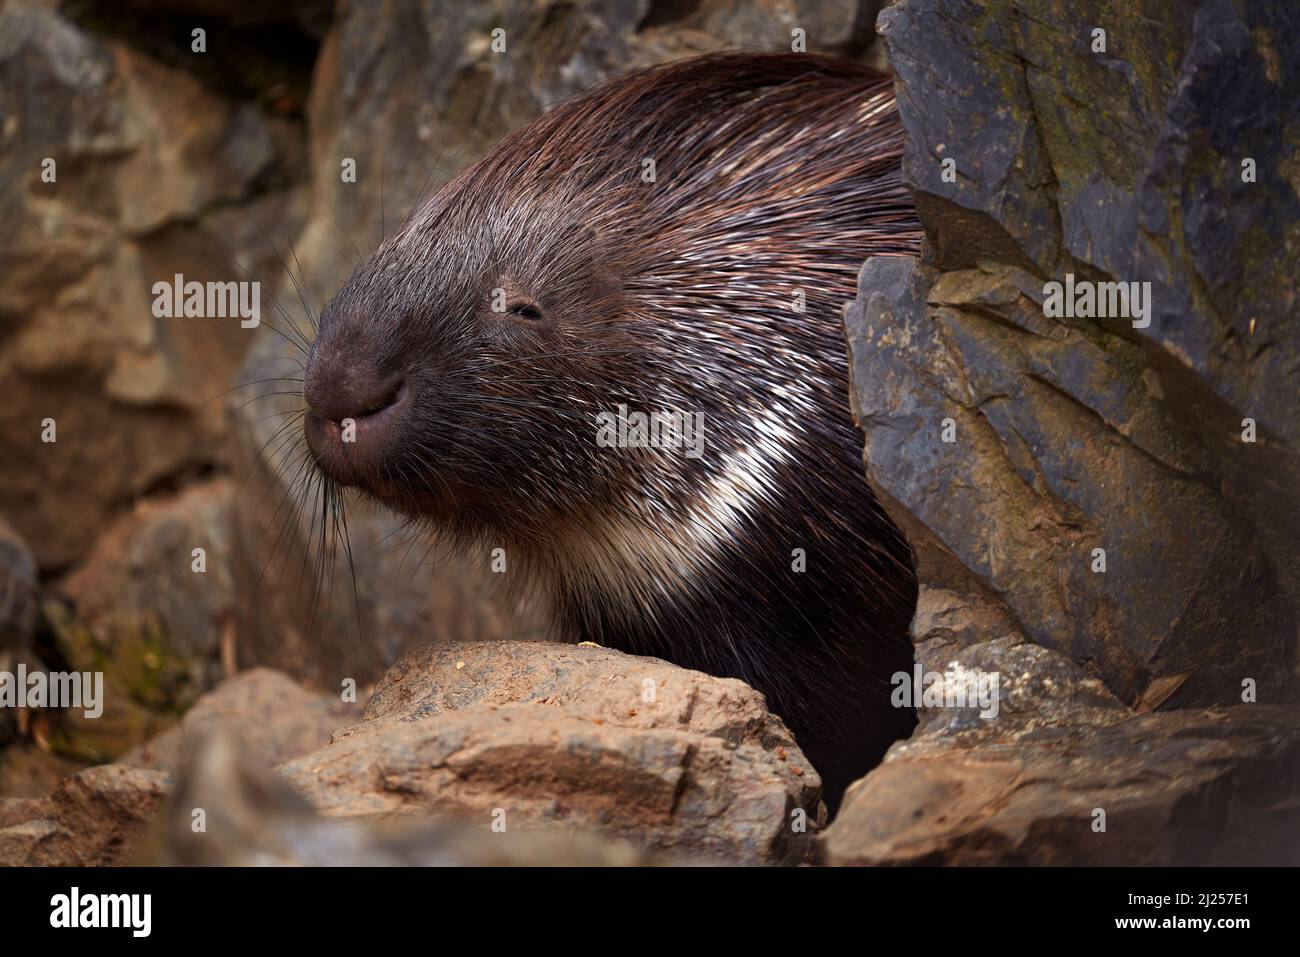 Indian crested porcupime, Hystrix indica, in the nature rock habitat. cute animal in nature, India in Asia. Prickle quill black animal. Cute mammal in Stock Photo